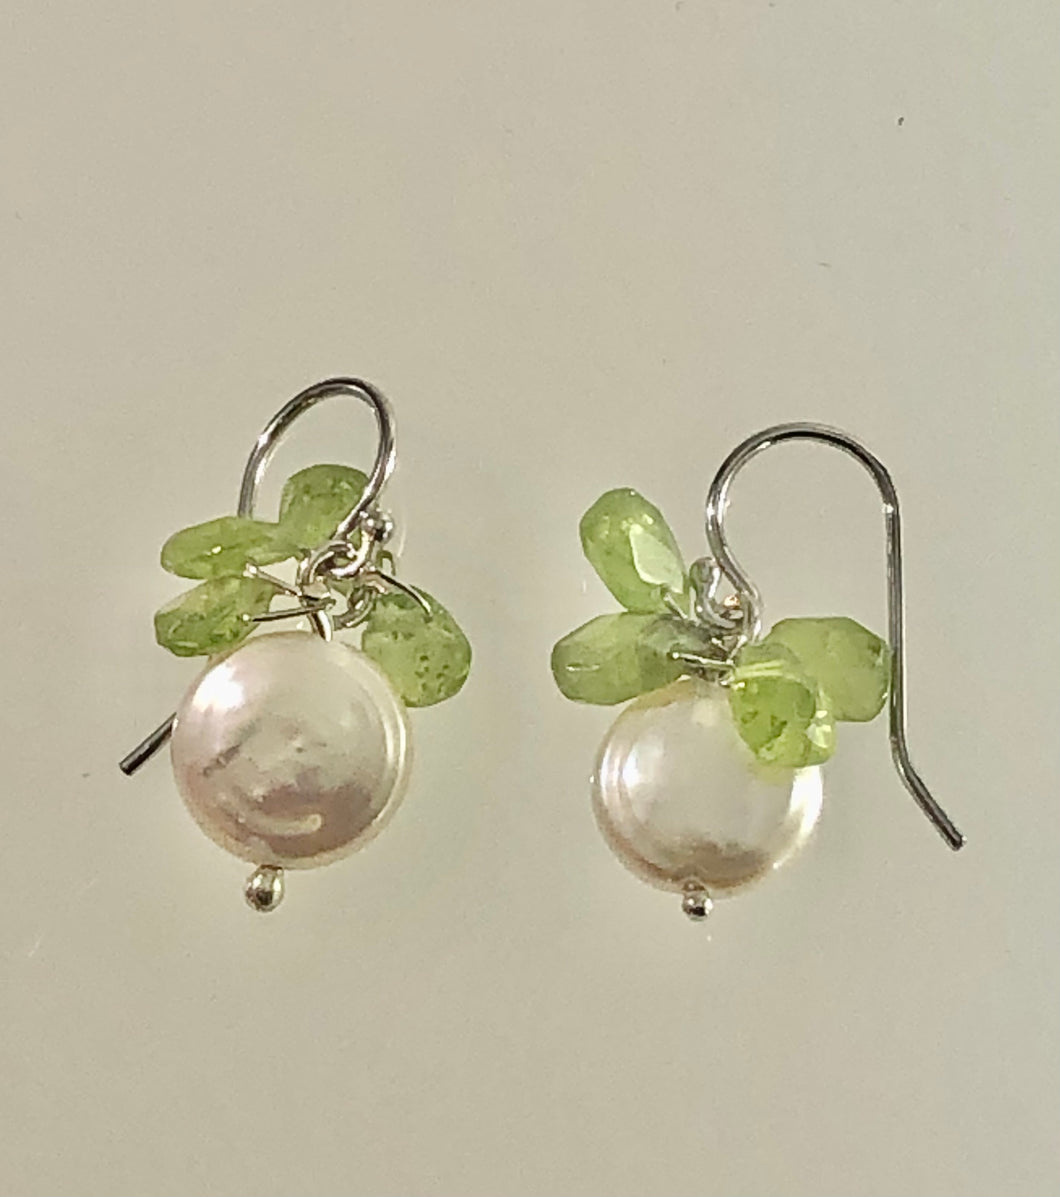 Peridot and Coin Pearl Earring in Sterling Silver